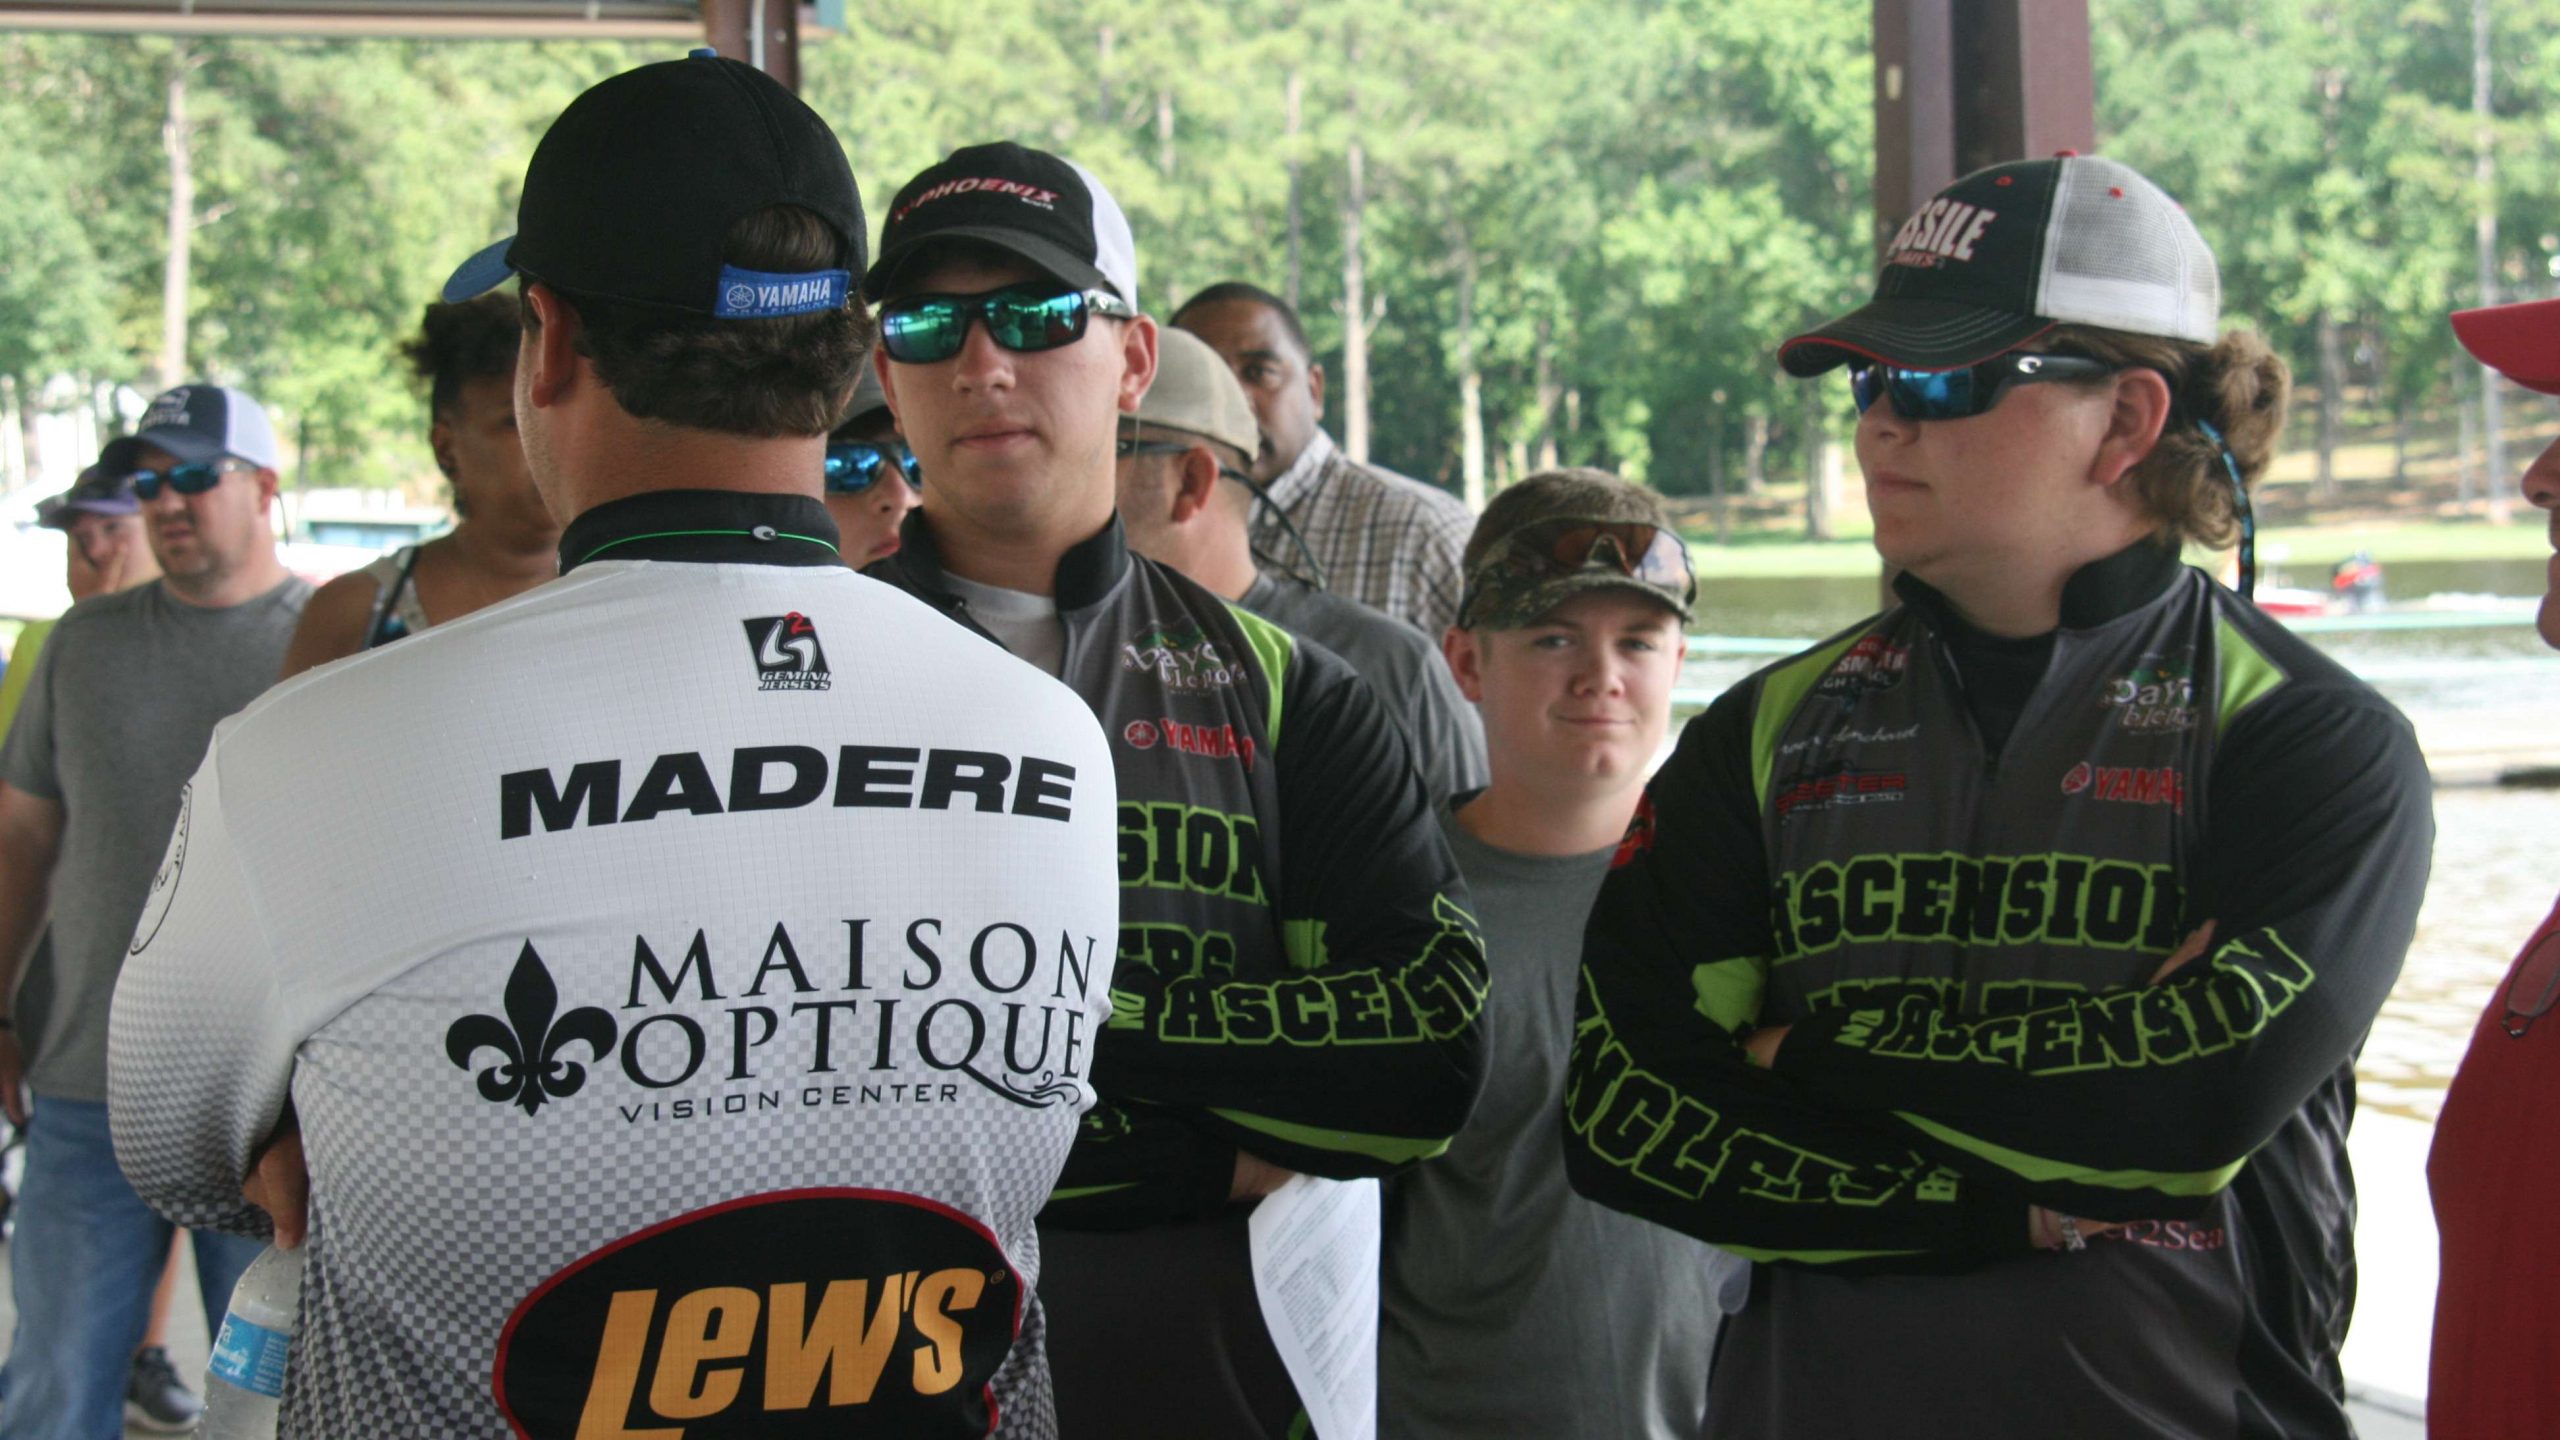 Cade Fortenberry and Braden Blanchard finished second in the Costa Bassmaster High School National Championship last year. They look like they are ready for business at the Central Open.